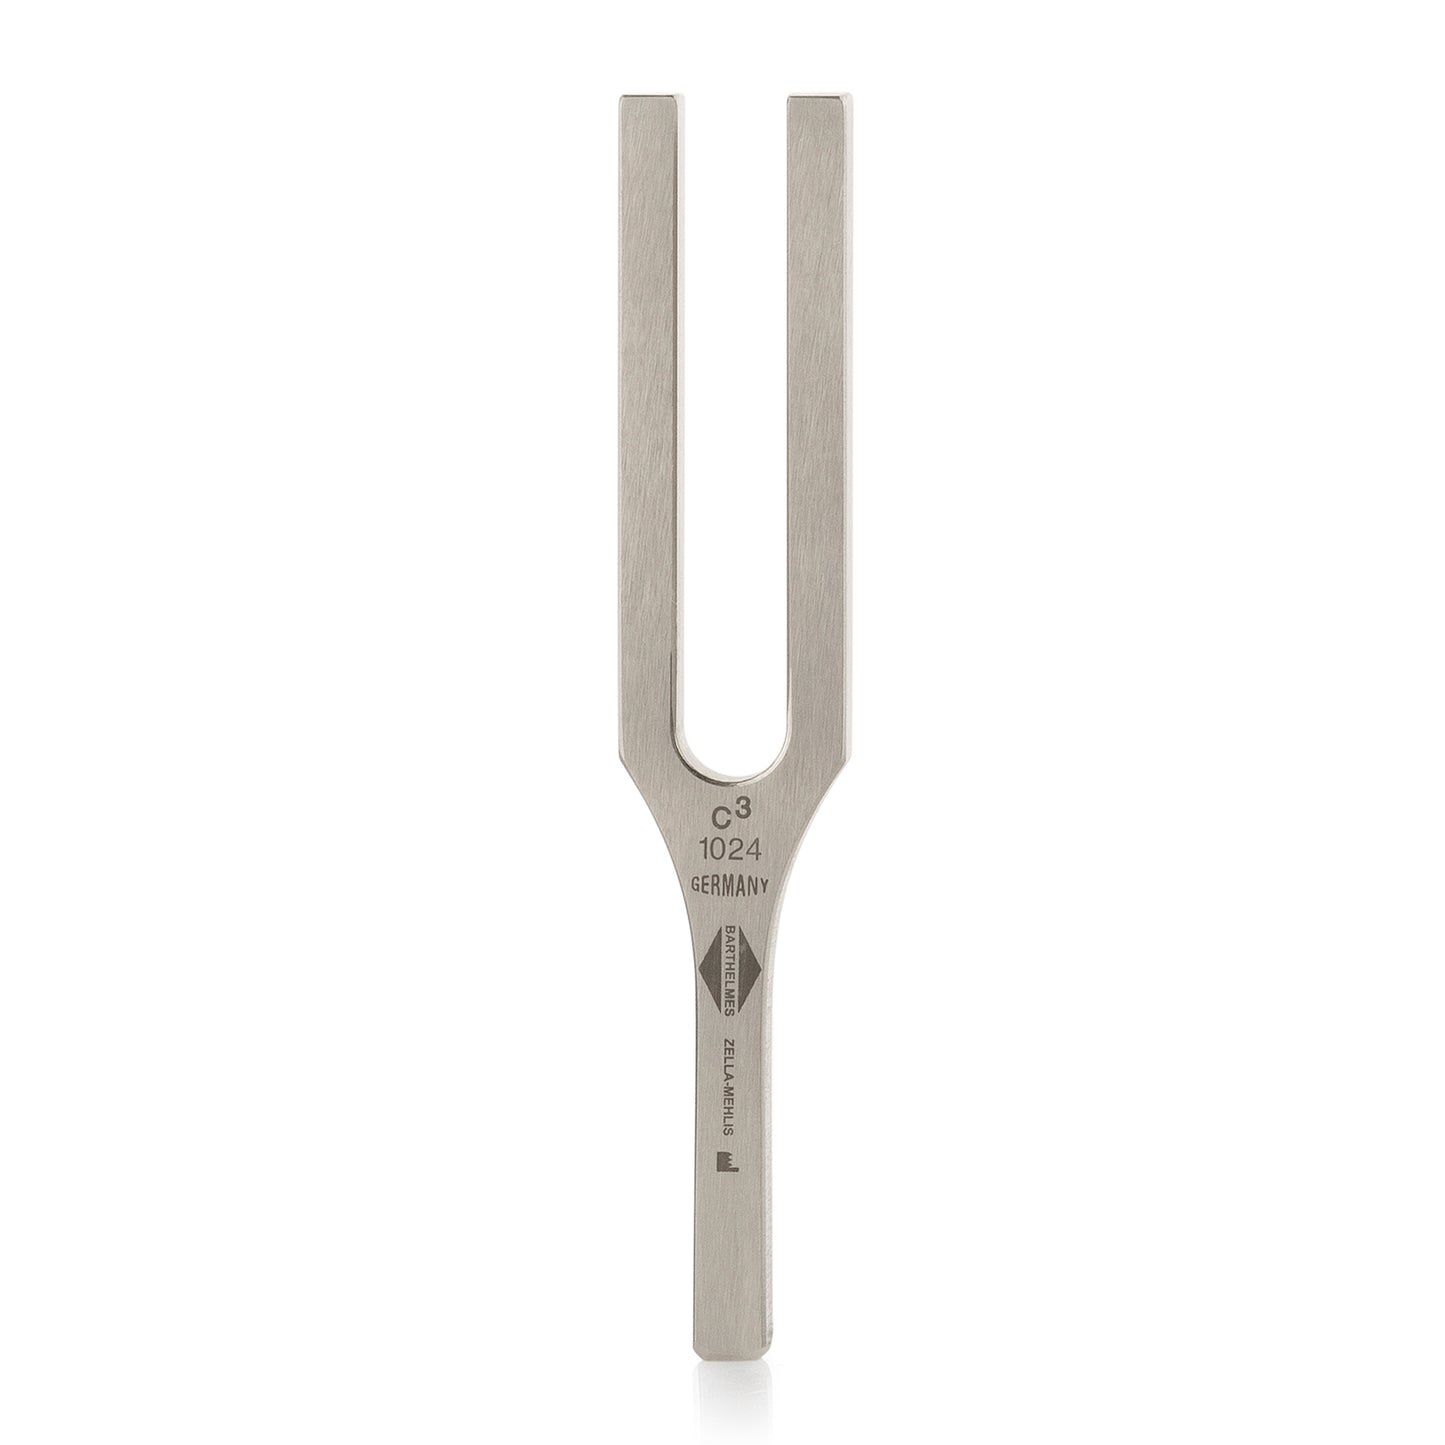 Barthelmes tuning fork c3 1024 Hz for ear doctors according to Hartmann